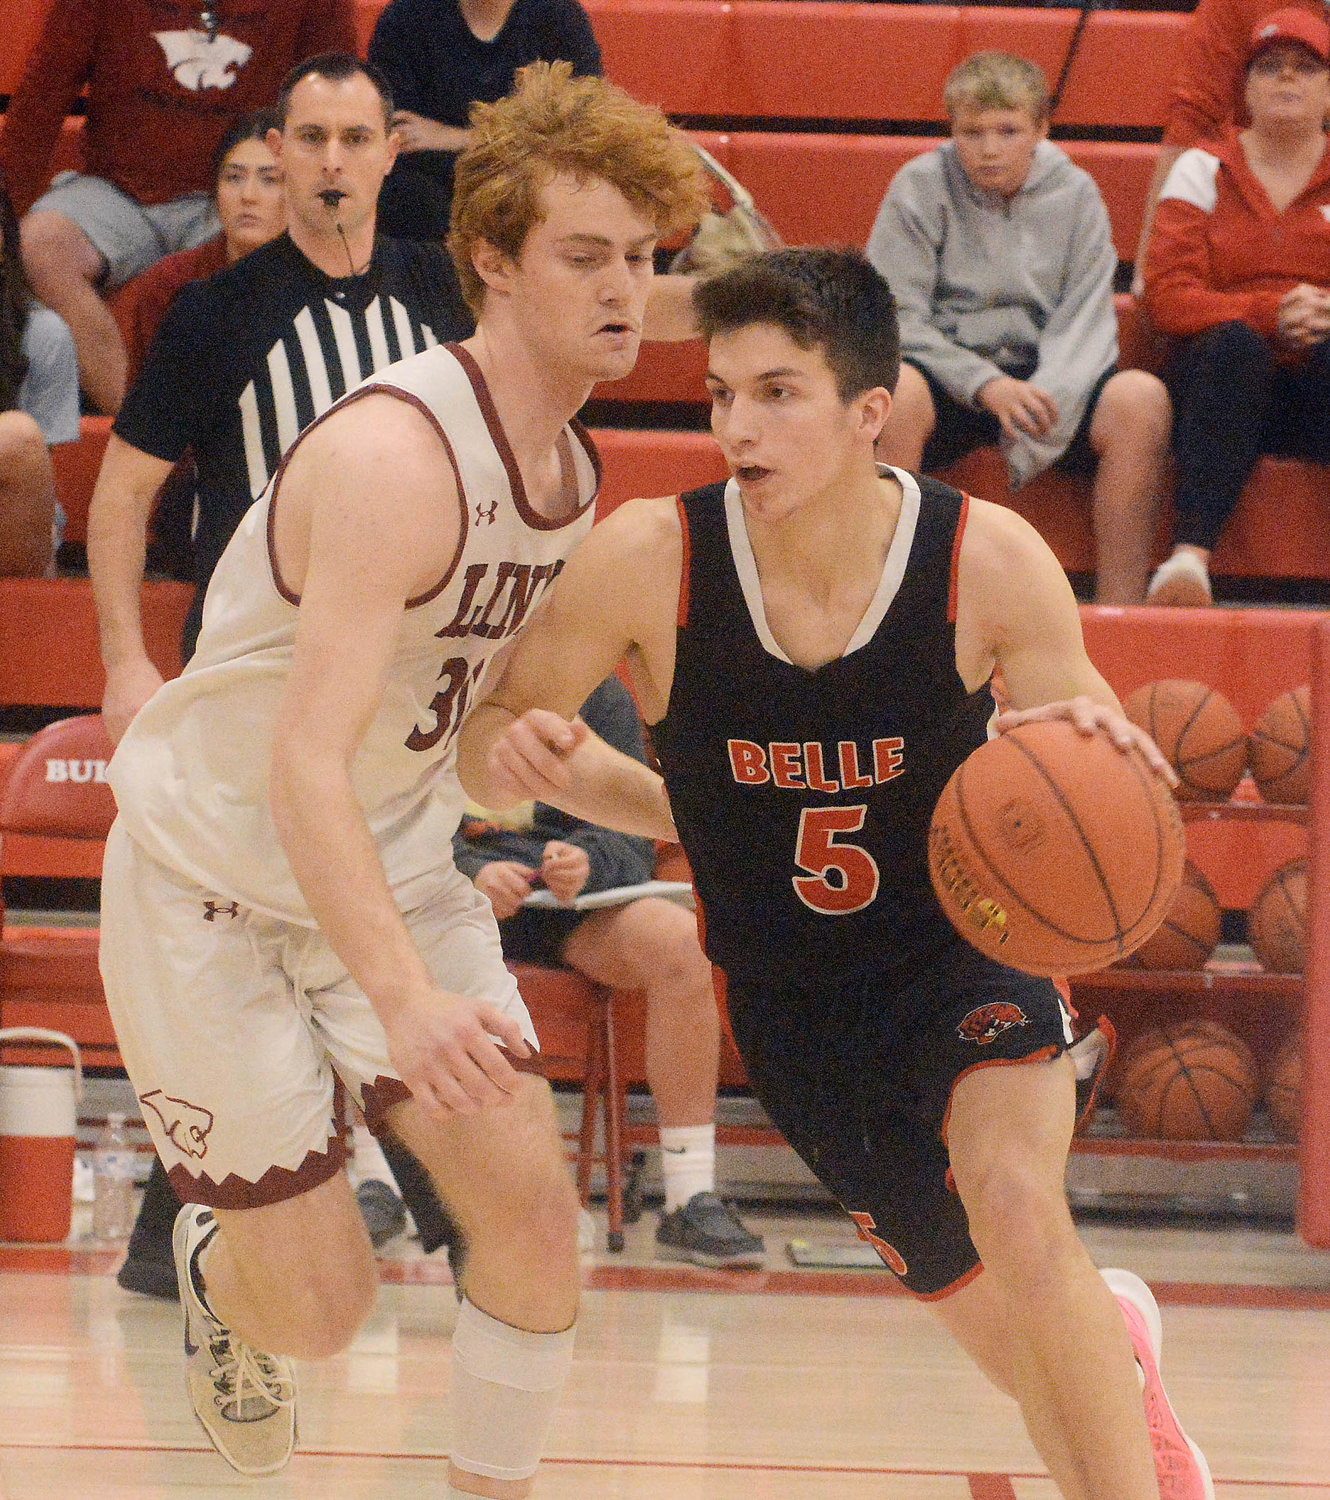 Brayden Cadwallader (far right) handles the basketball while being guarded by Linn’s Noah Hall during first-round action at the Missouri State High School Activities Association (MSHSAA) Class 3, District 9 Tournament at Dixon High School.